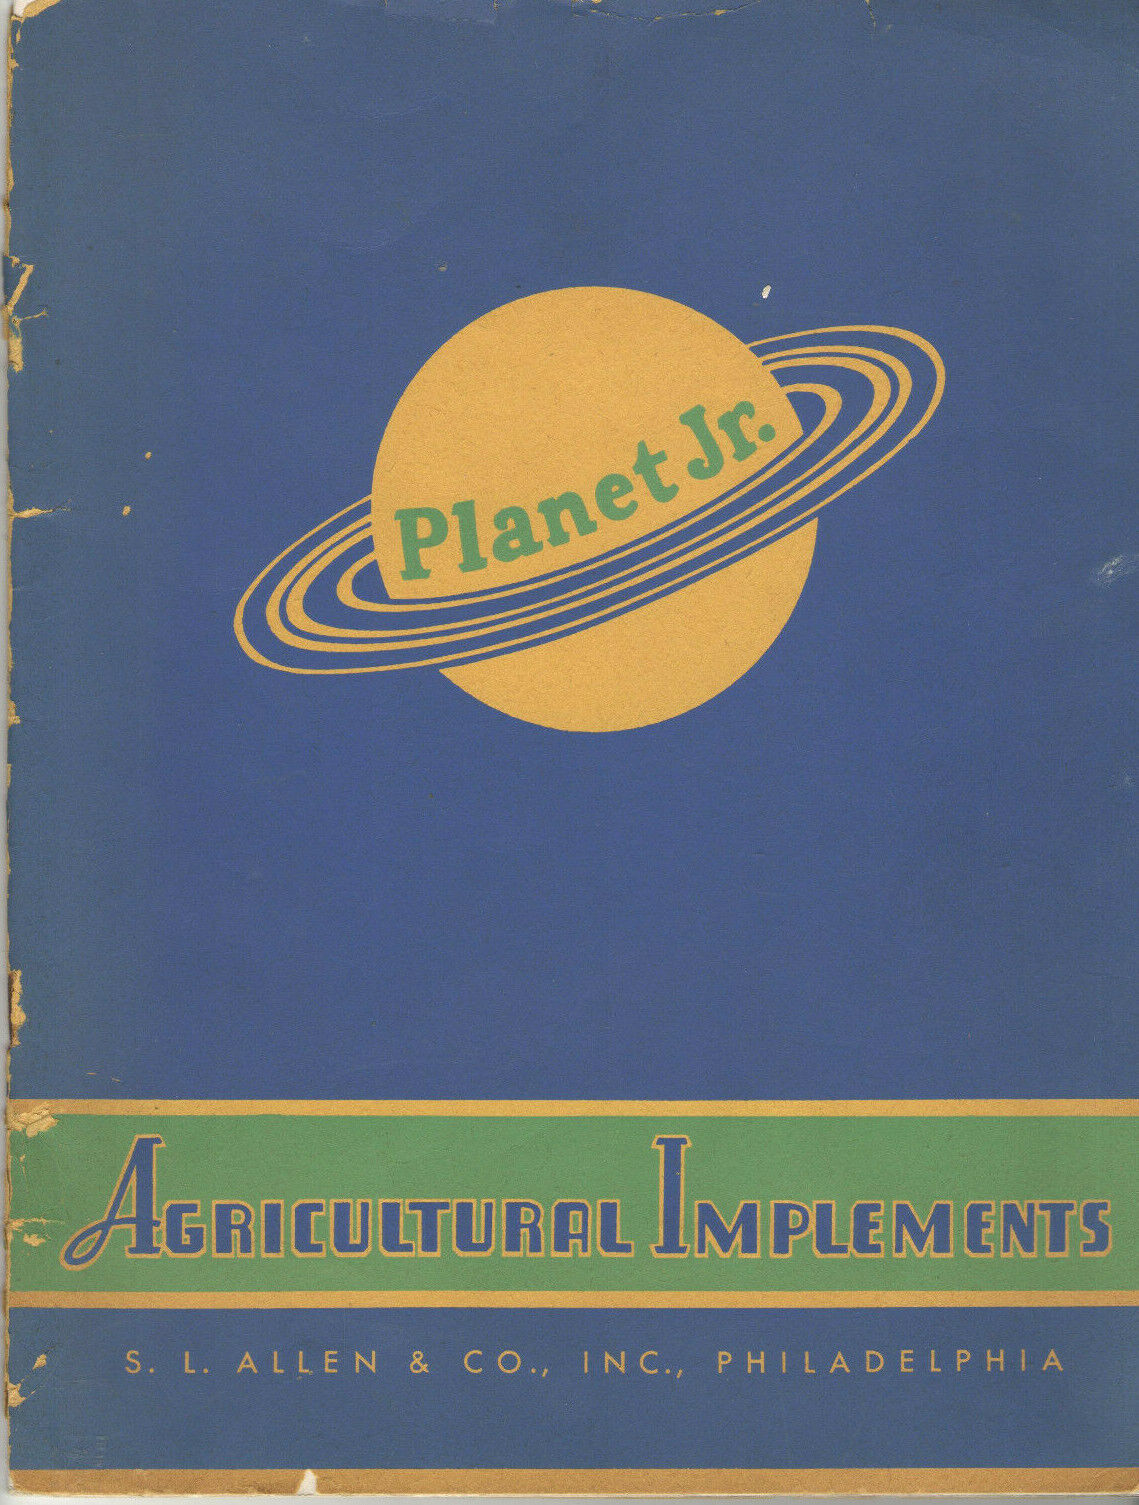 VTG 1944 PLANET JR AGRICULTURAL IMPLEMENTS CATALOG W/PRICE LIST SEEDERS/PLOWS+